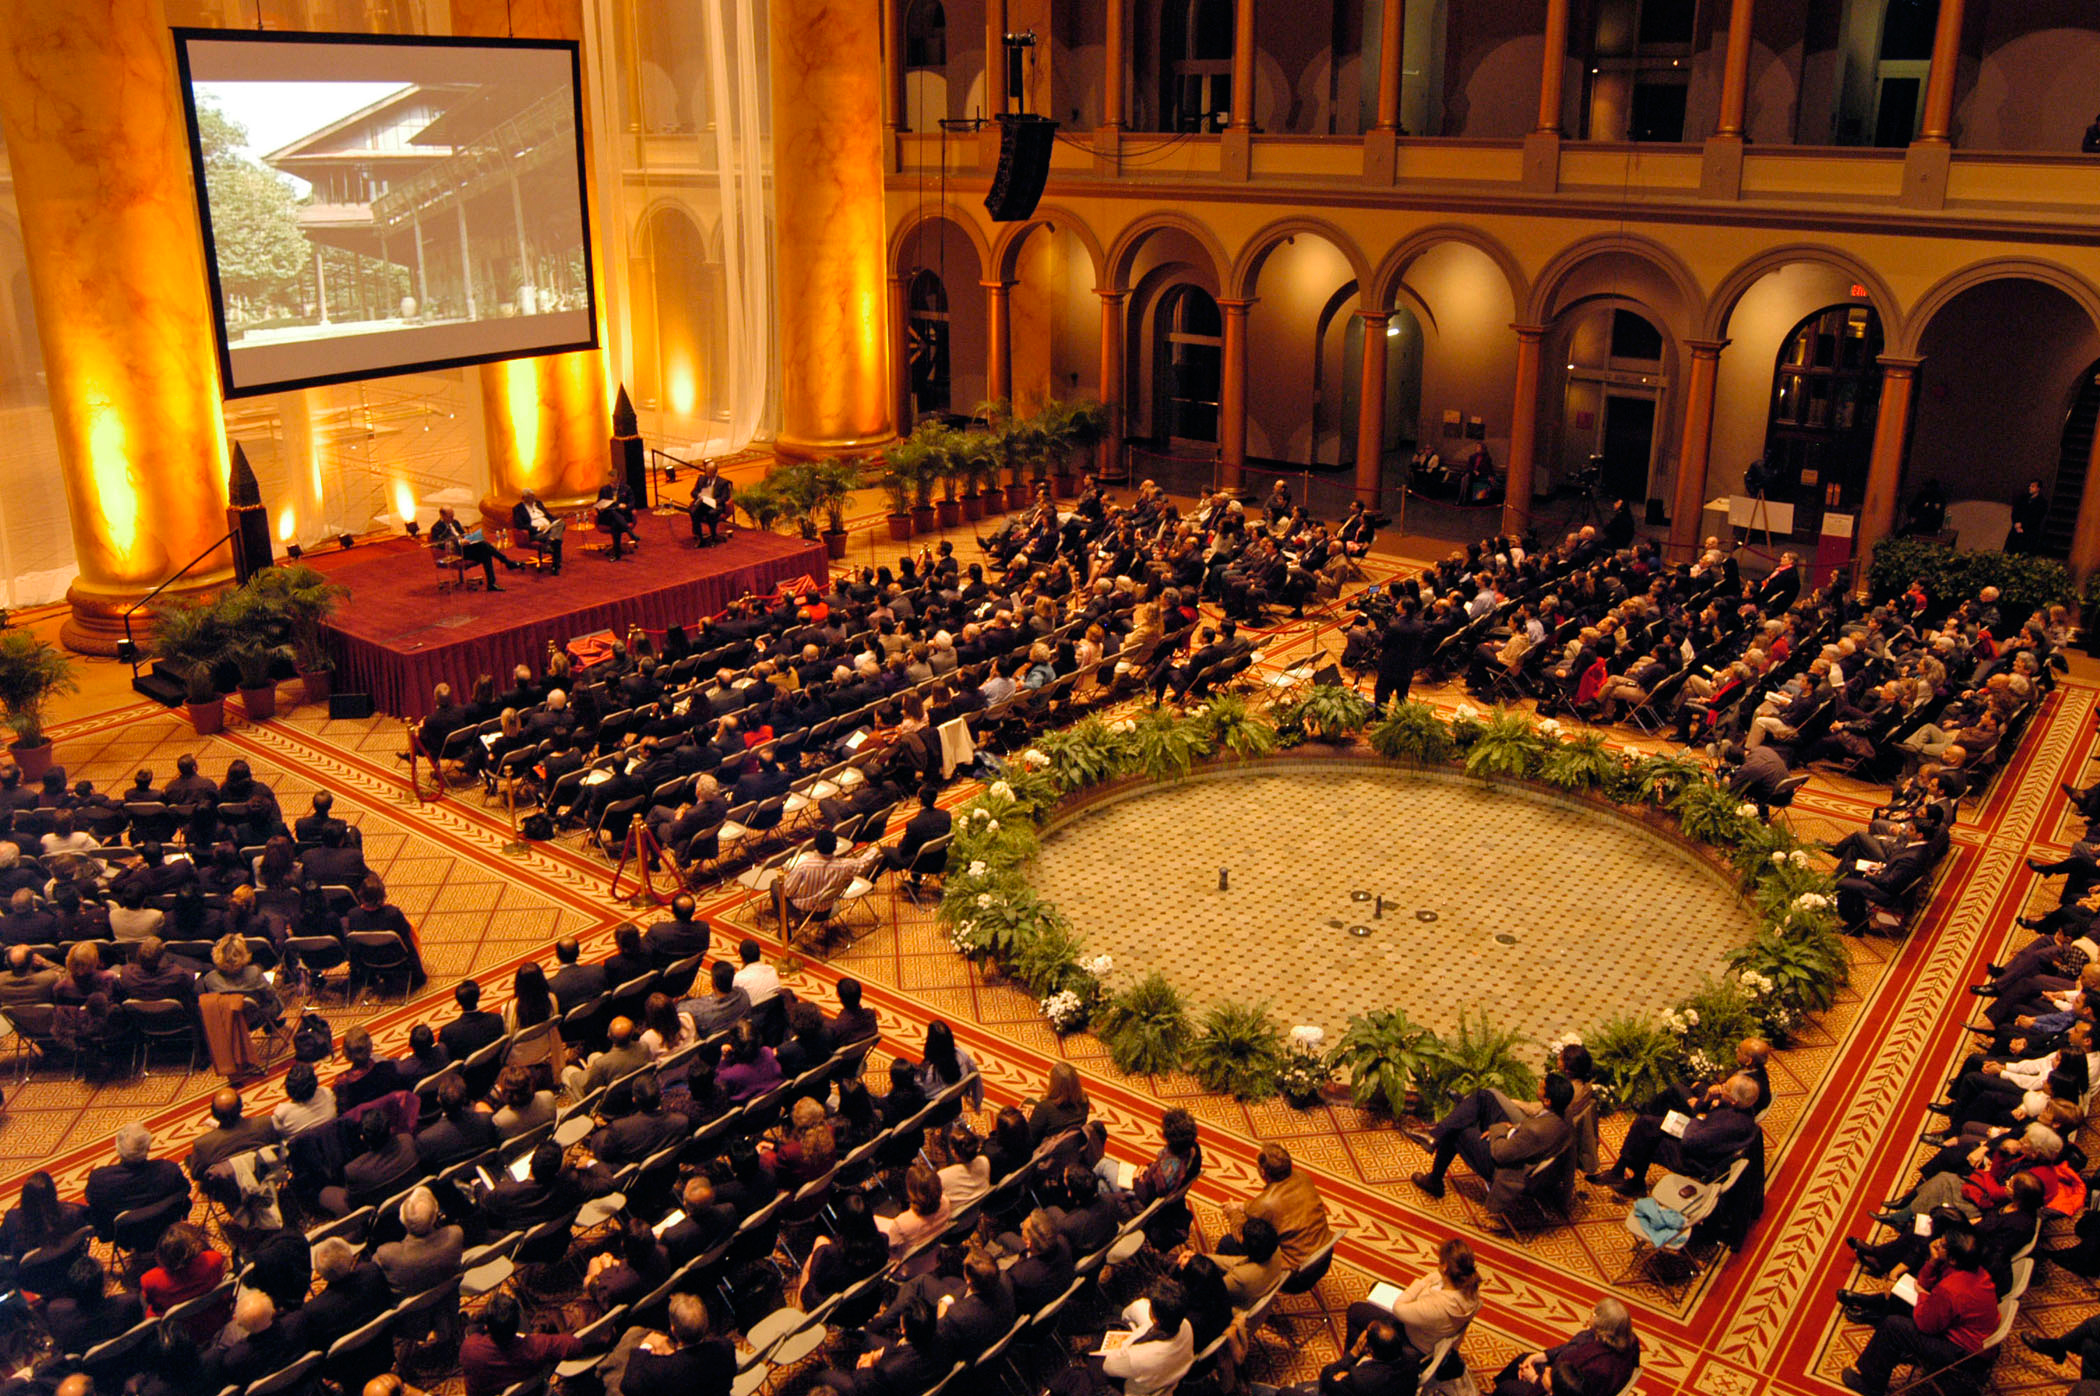 Awards ceremony at the National Building Museum for the 2005 prize winner Aga Kahn